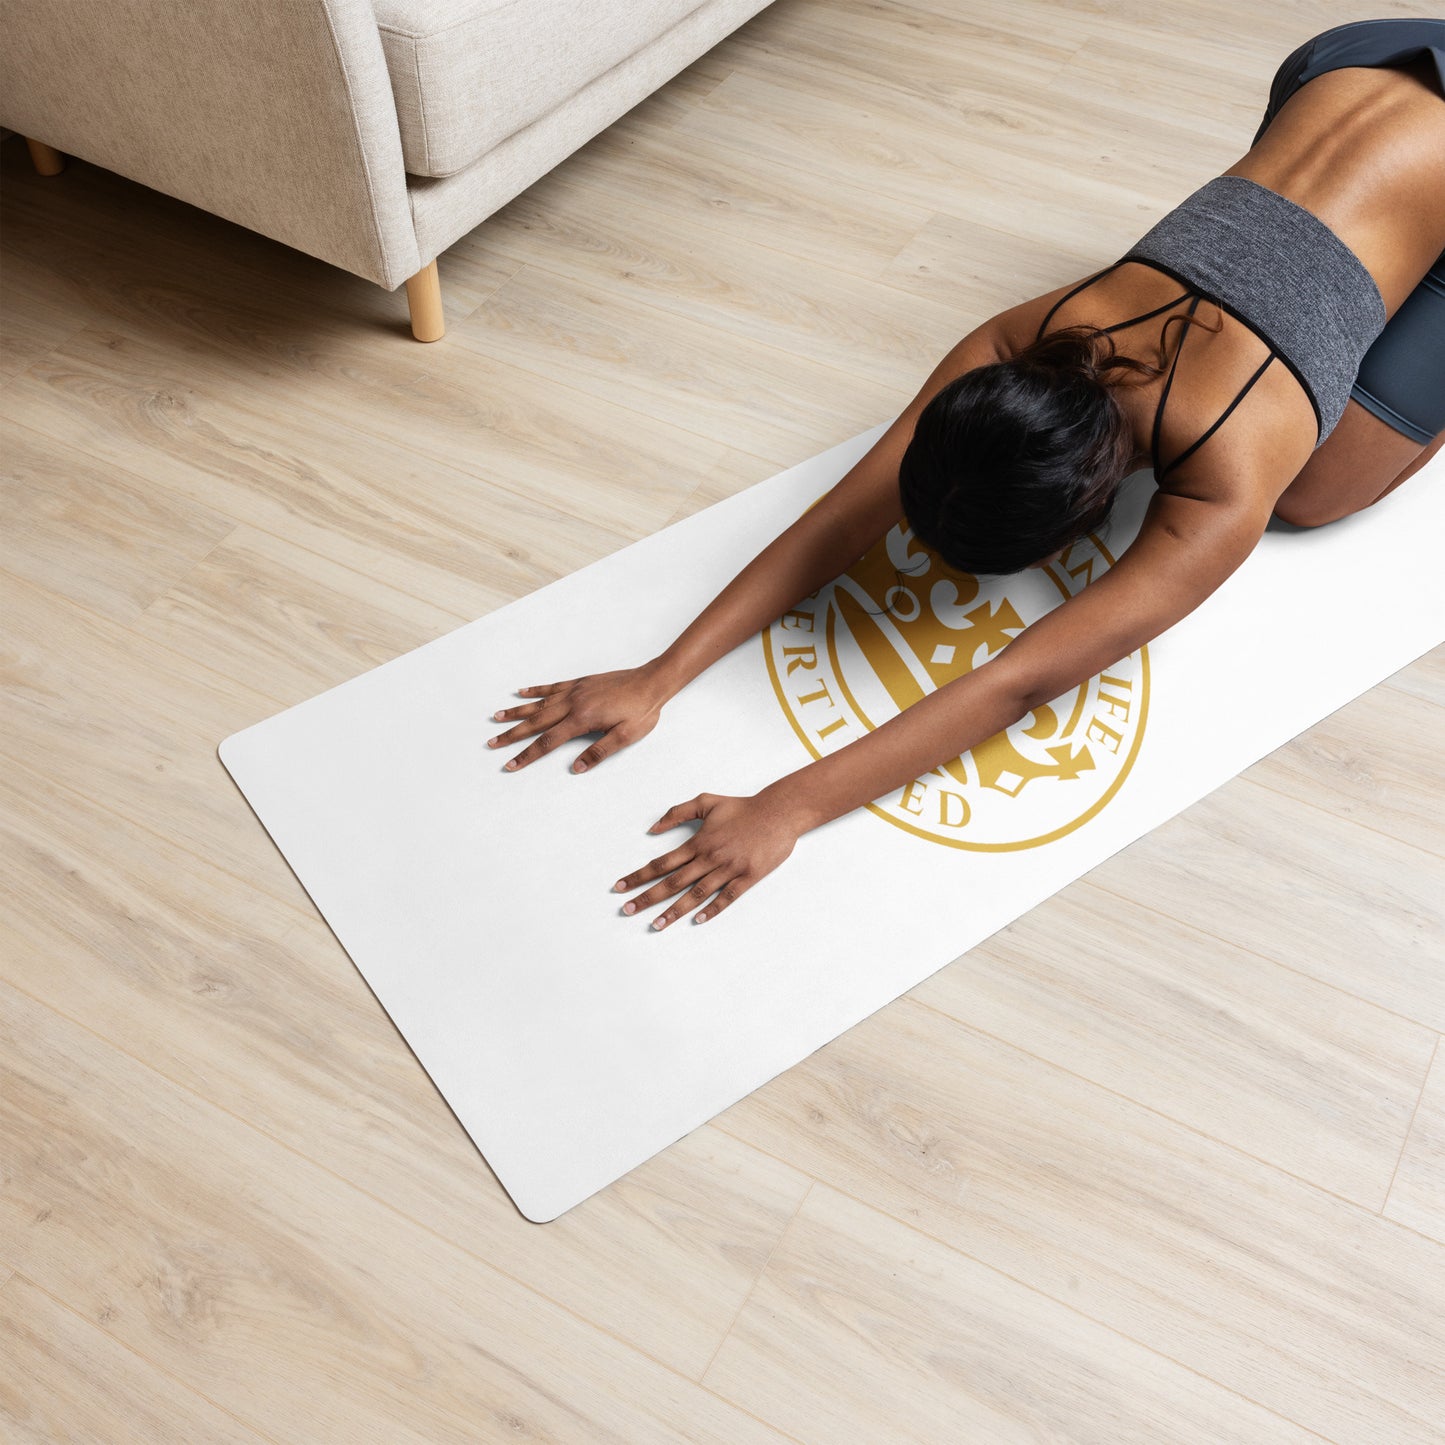 Gold and White Pageant Life Certified Yoga mat